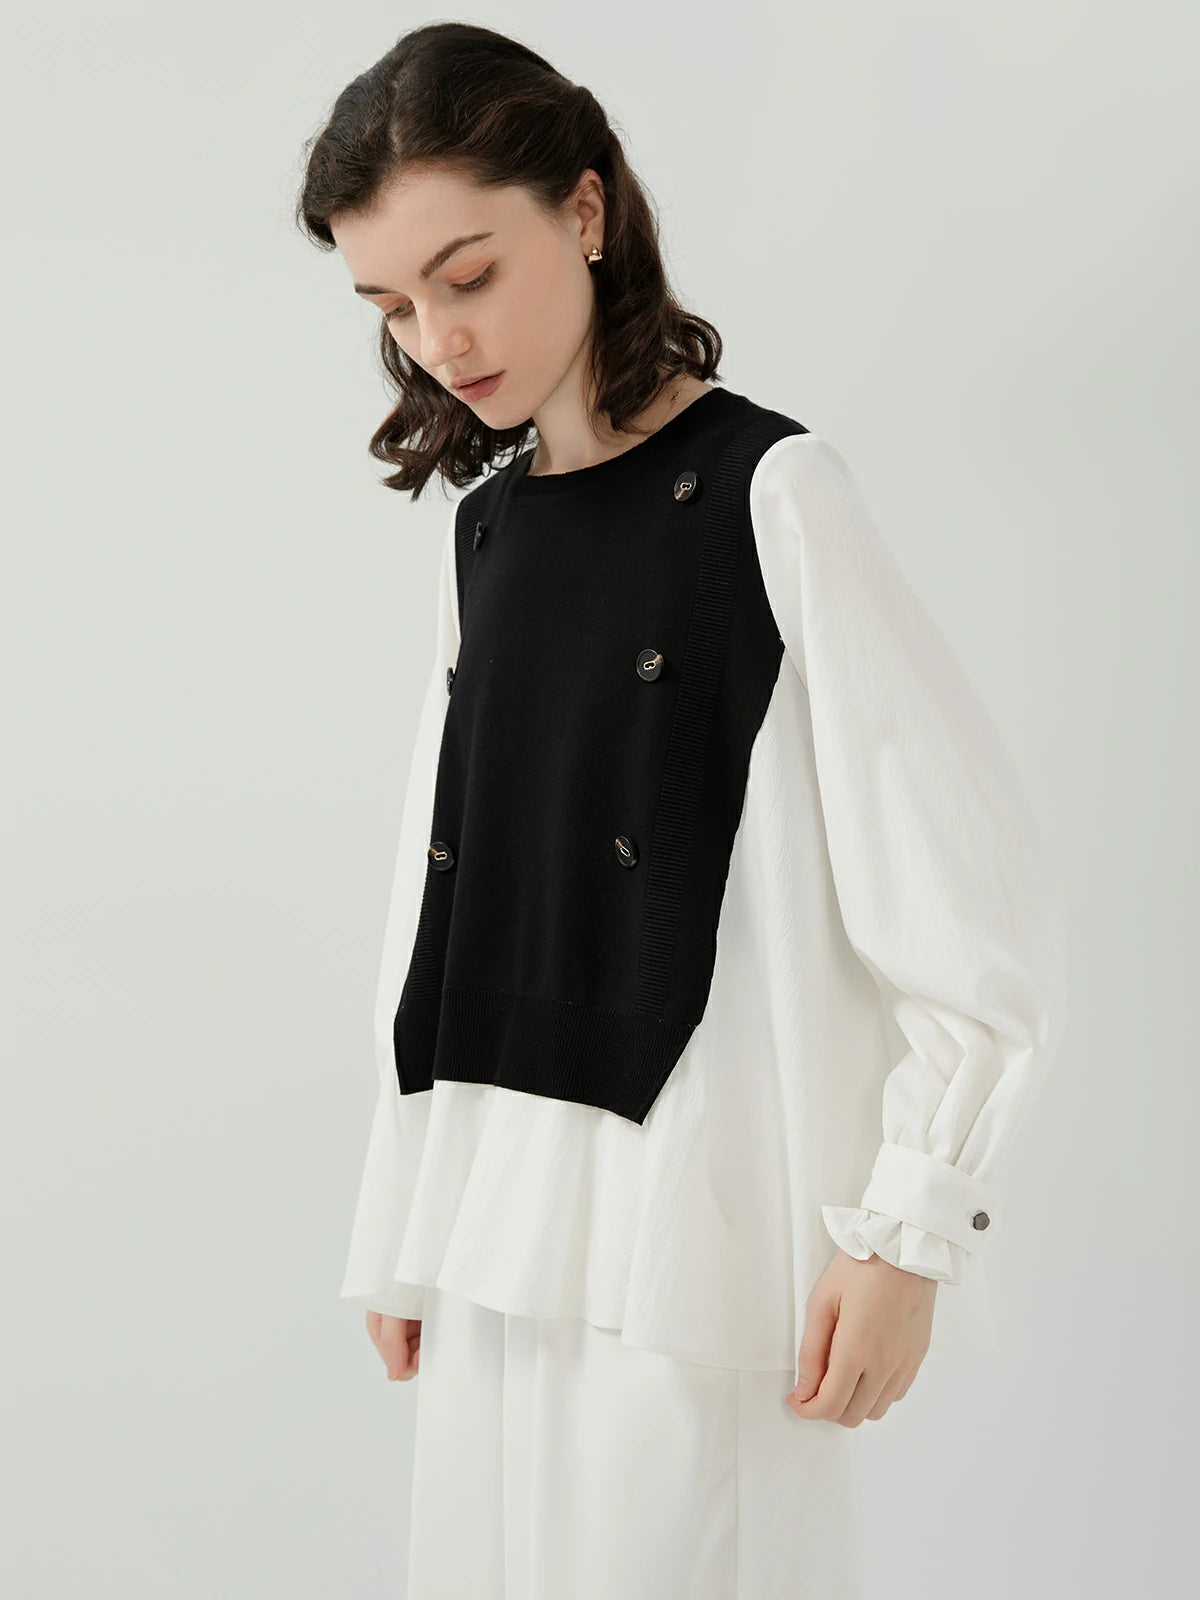 Feminine and Delicate Ruffled Edges on Knit Combination Shirt: Adding a touch of elegance.